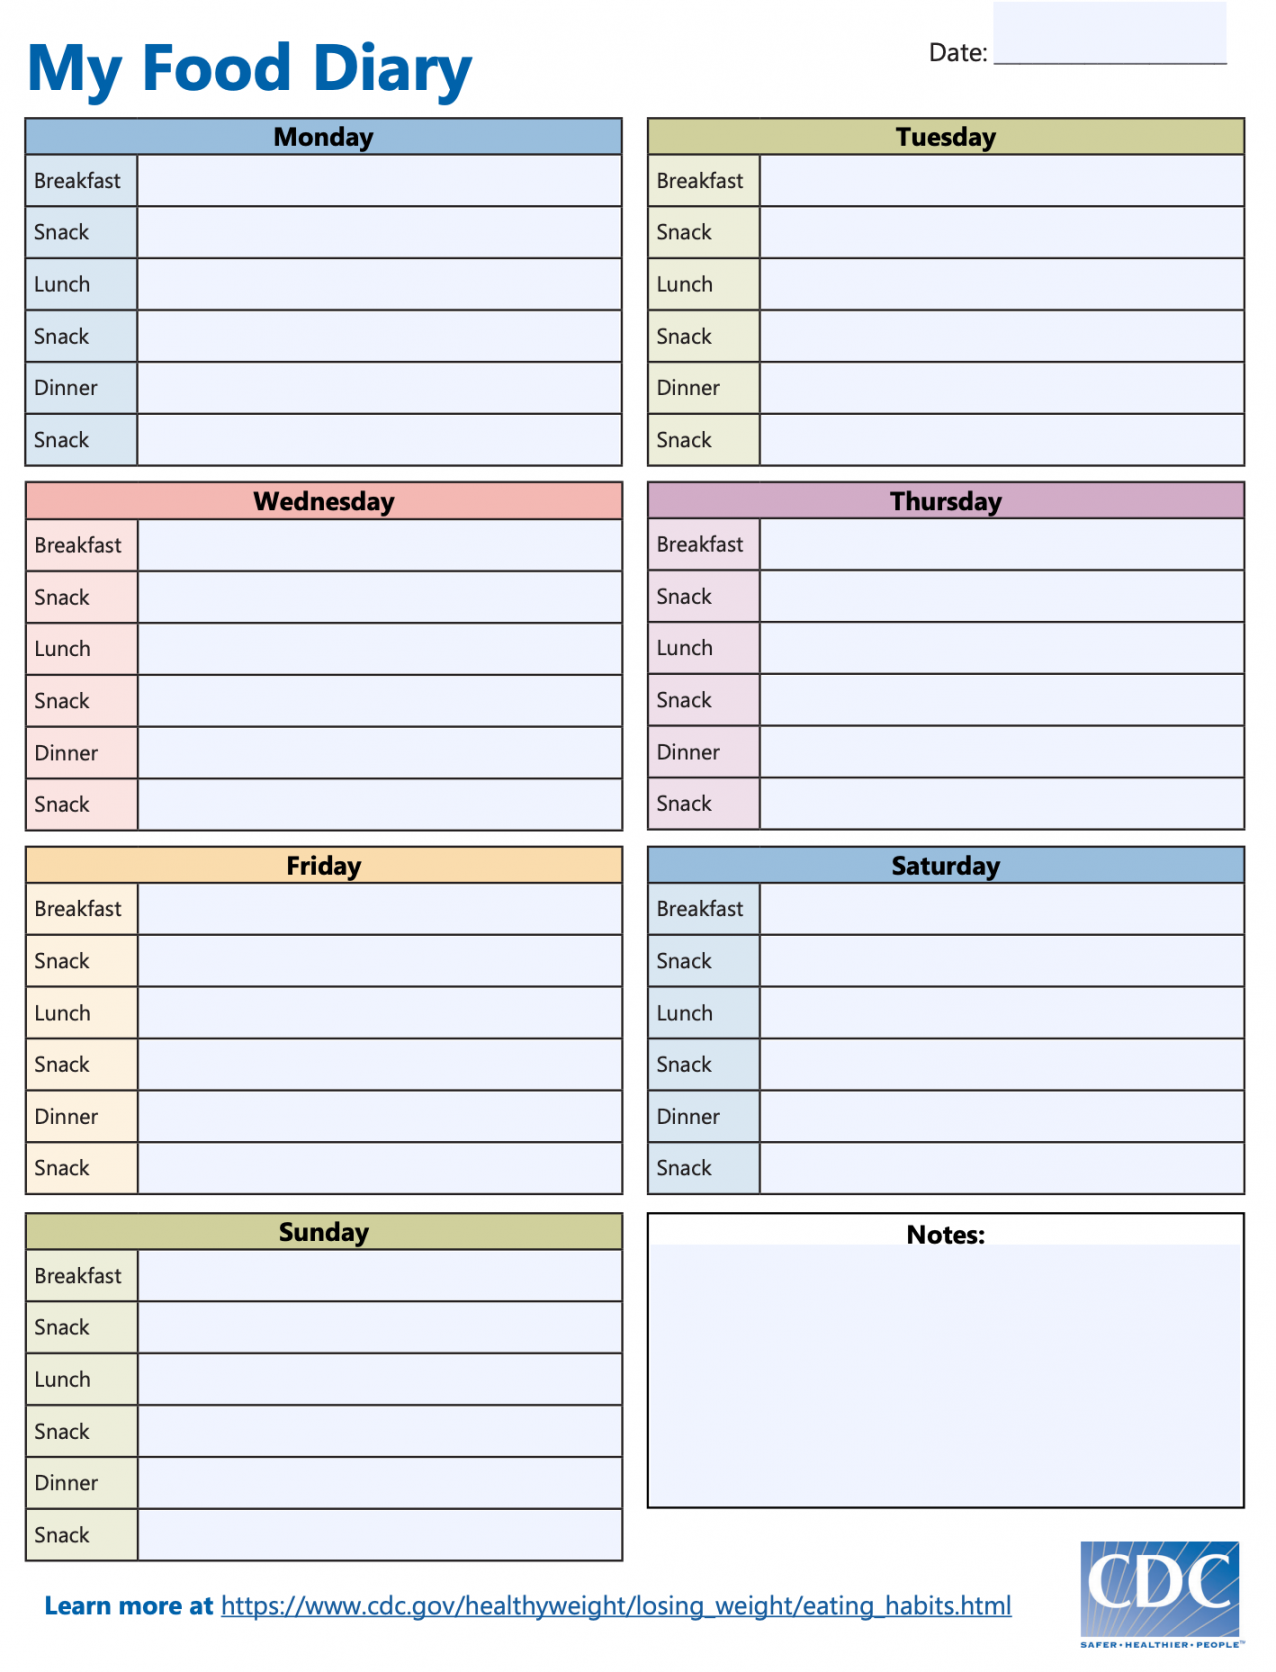 Food Diary Templates, Apps And Printables Online In  - FREE Printables - Free Printable Food Journal